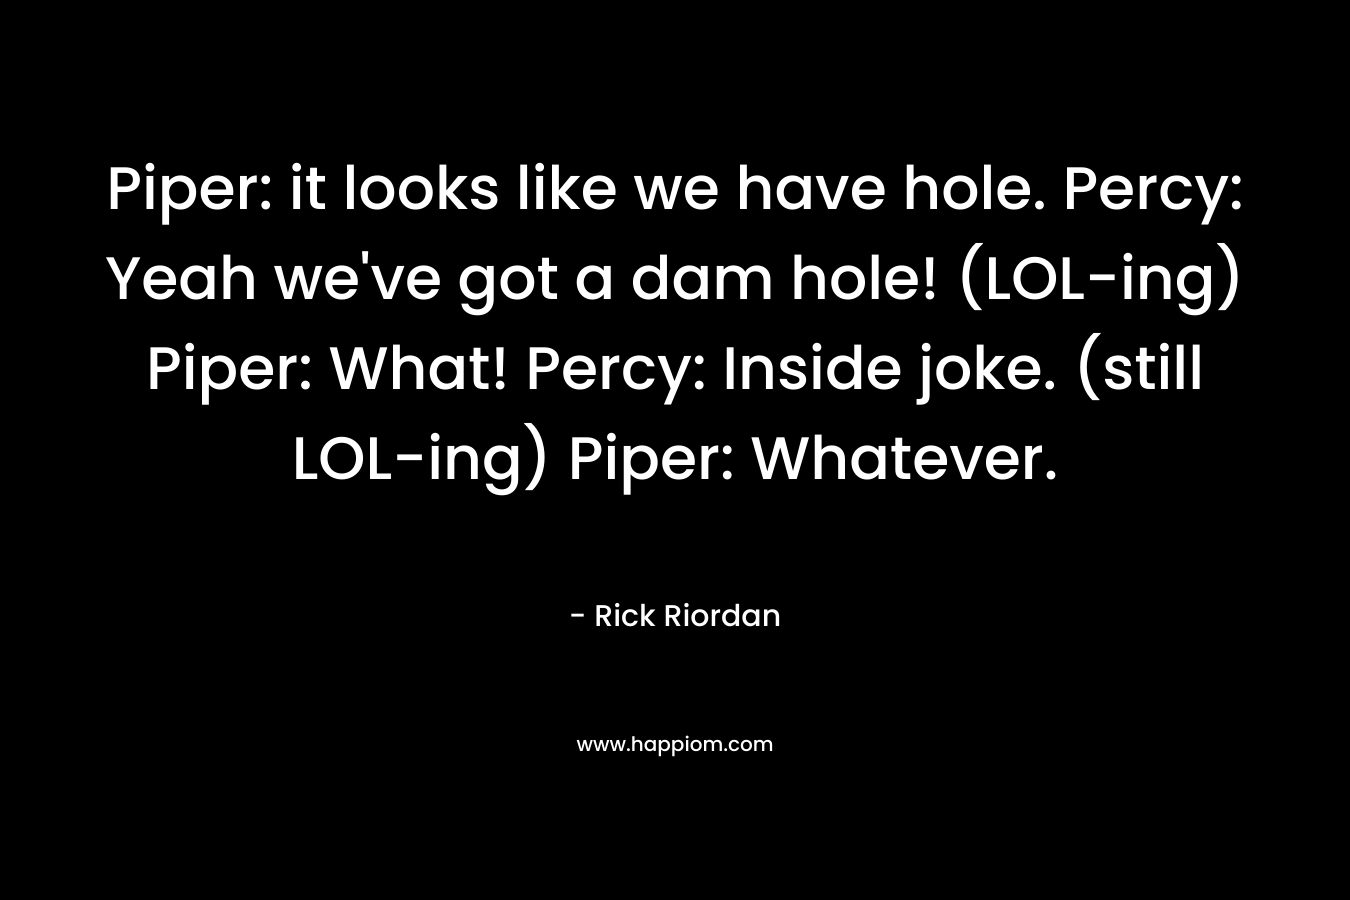 Piper: it looks like we have hole. Percy: Yeah we’ve got a dam hole! (LOL-ing) Piper: What! Percy: Inside joke. (still LOL-ing) Piper: Whatever. – Rick Riordan